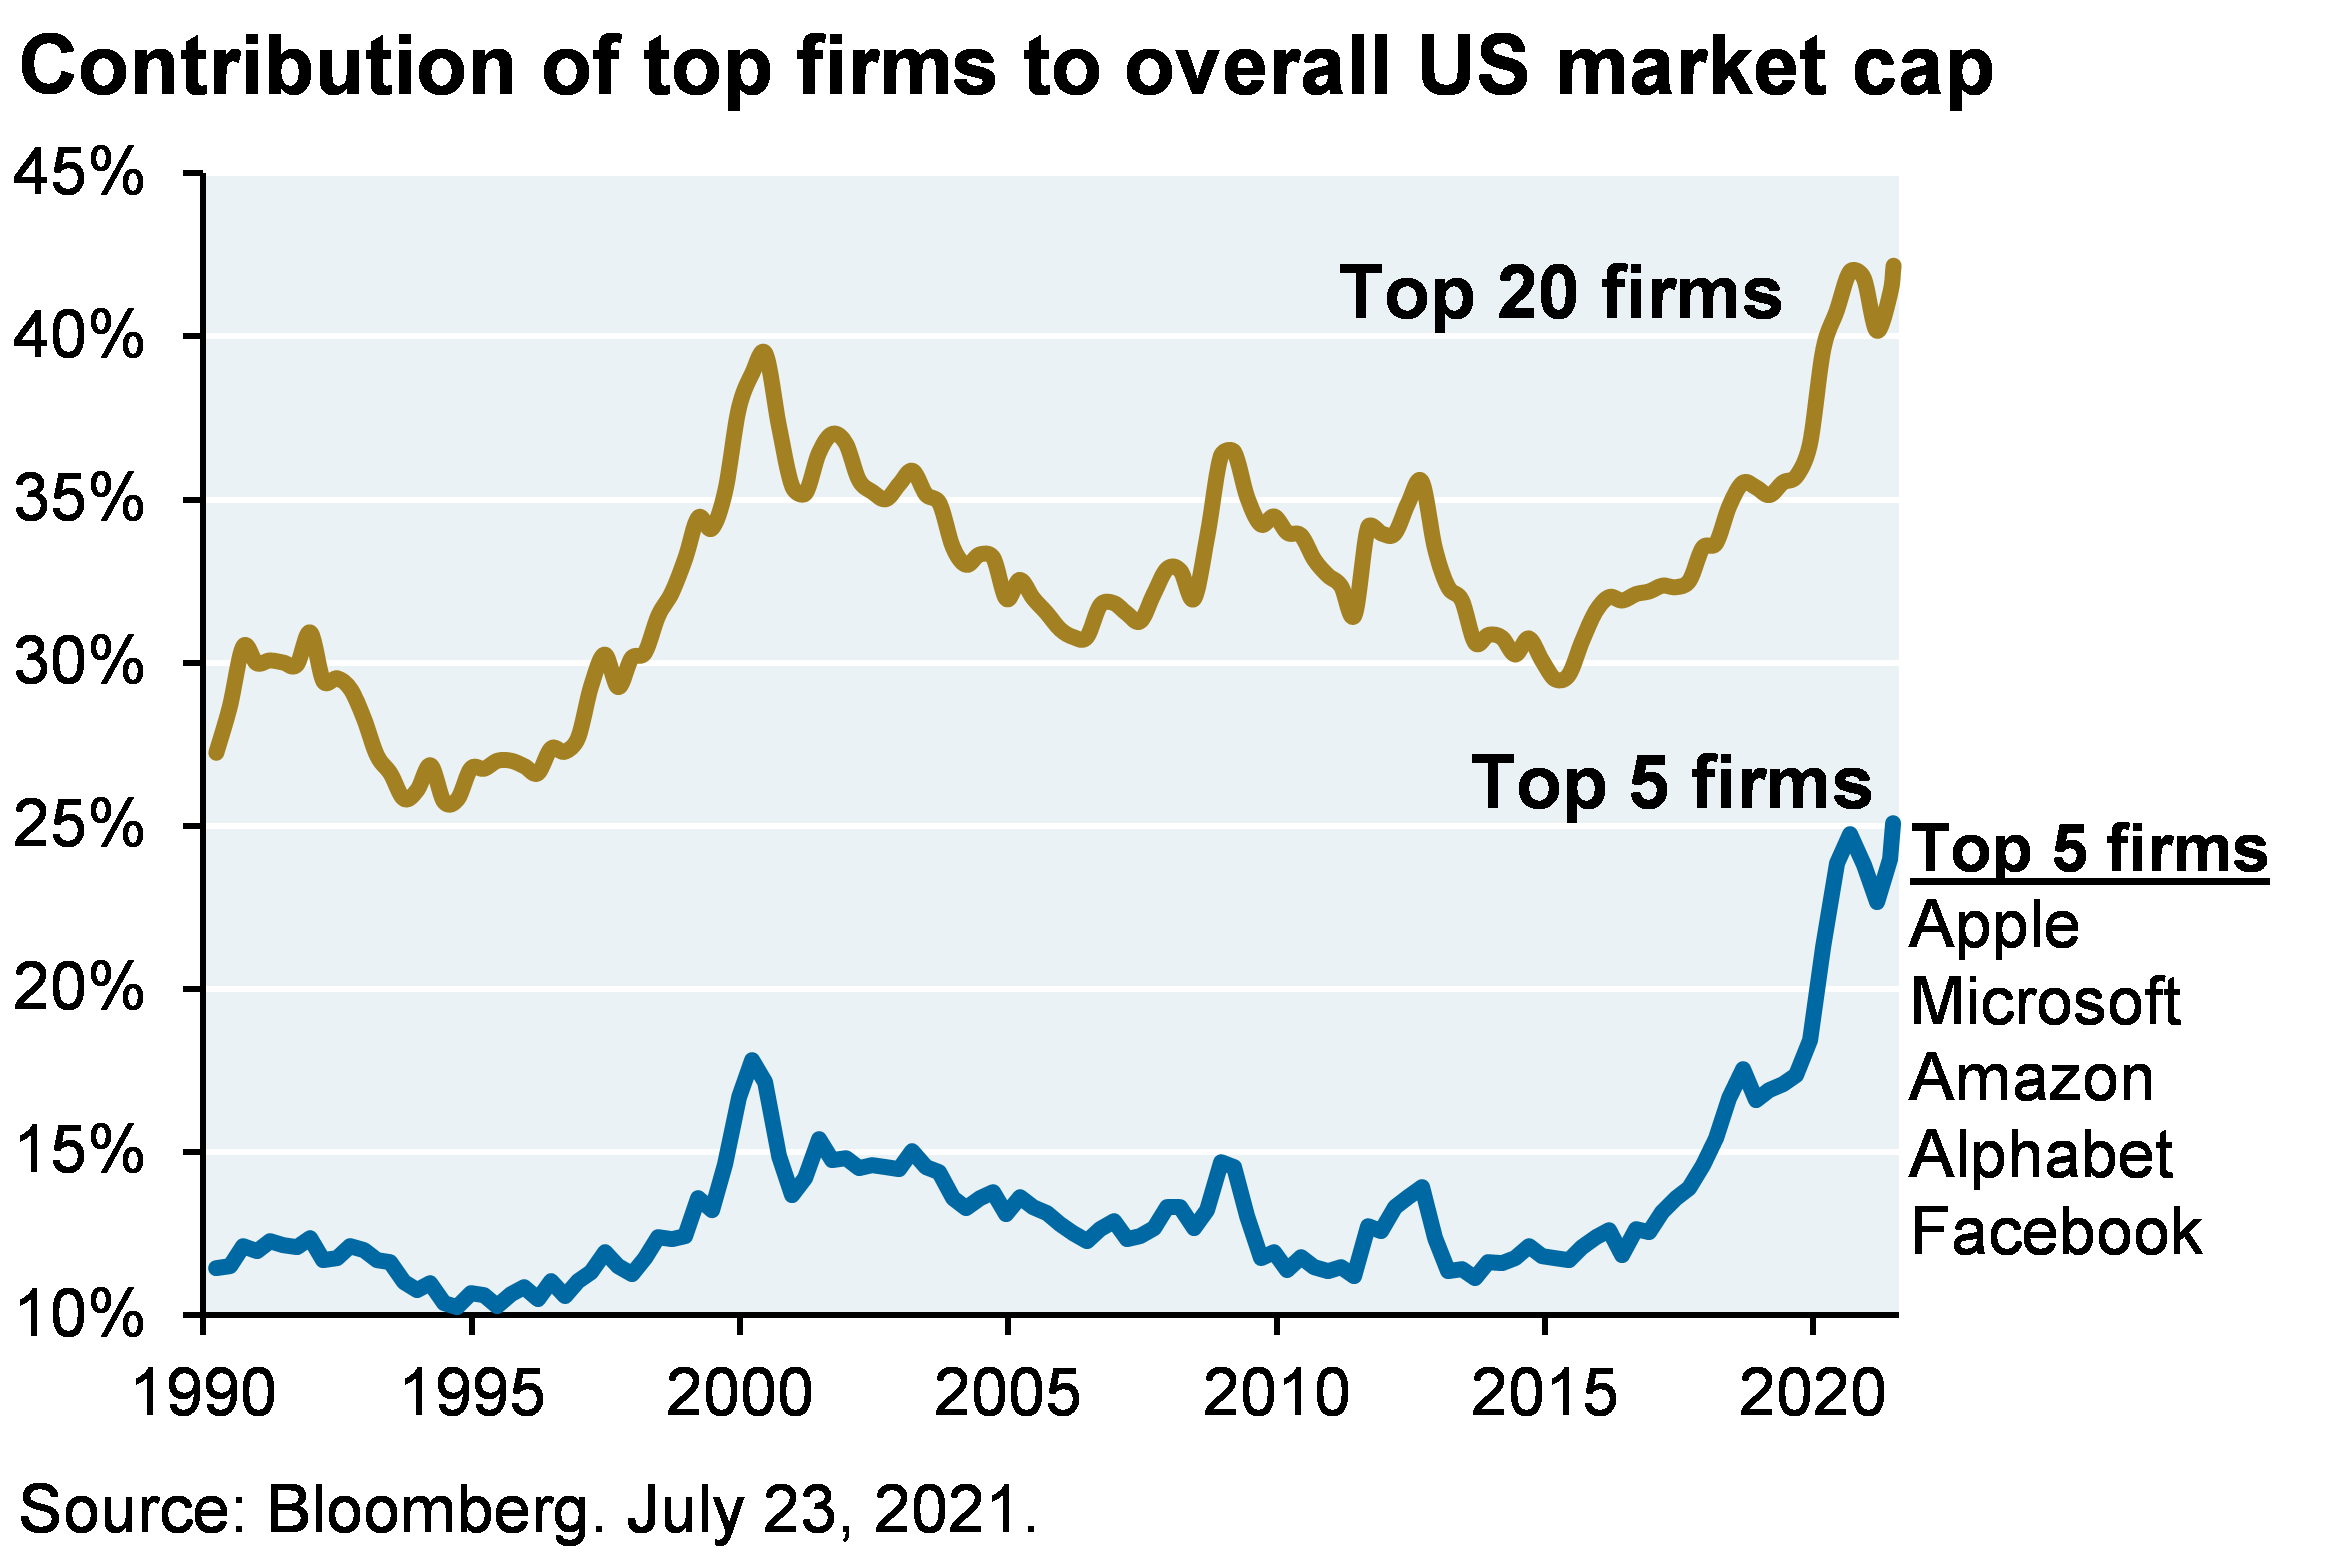 Line chart shows the contribution of the top 20 firms to the overall US market cap compared to the contribution of the top 5 firms to the overall US market cap from 1990 to 2021. Both lines have been increasing since 2015 and are currently at all-time highs. The top 5 firms (Apple, Microsoft, Amazon, Alphabet and Facebook) show an even more drastic increase.